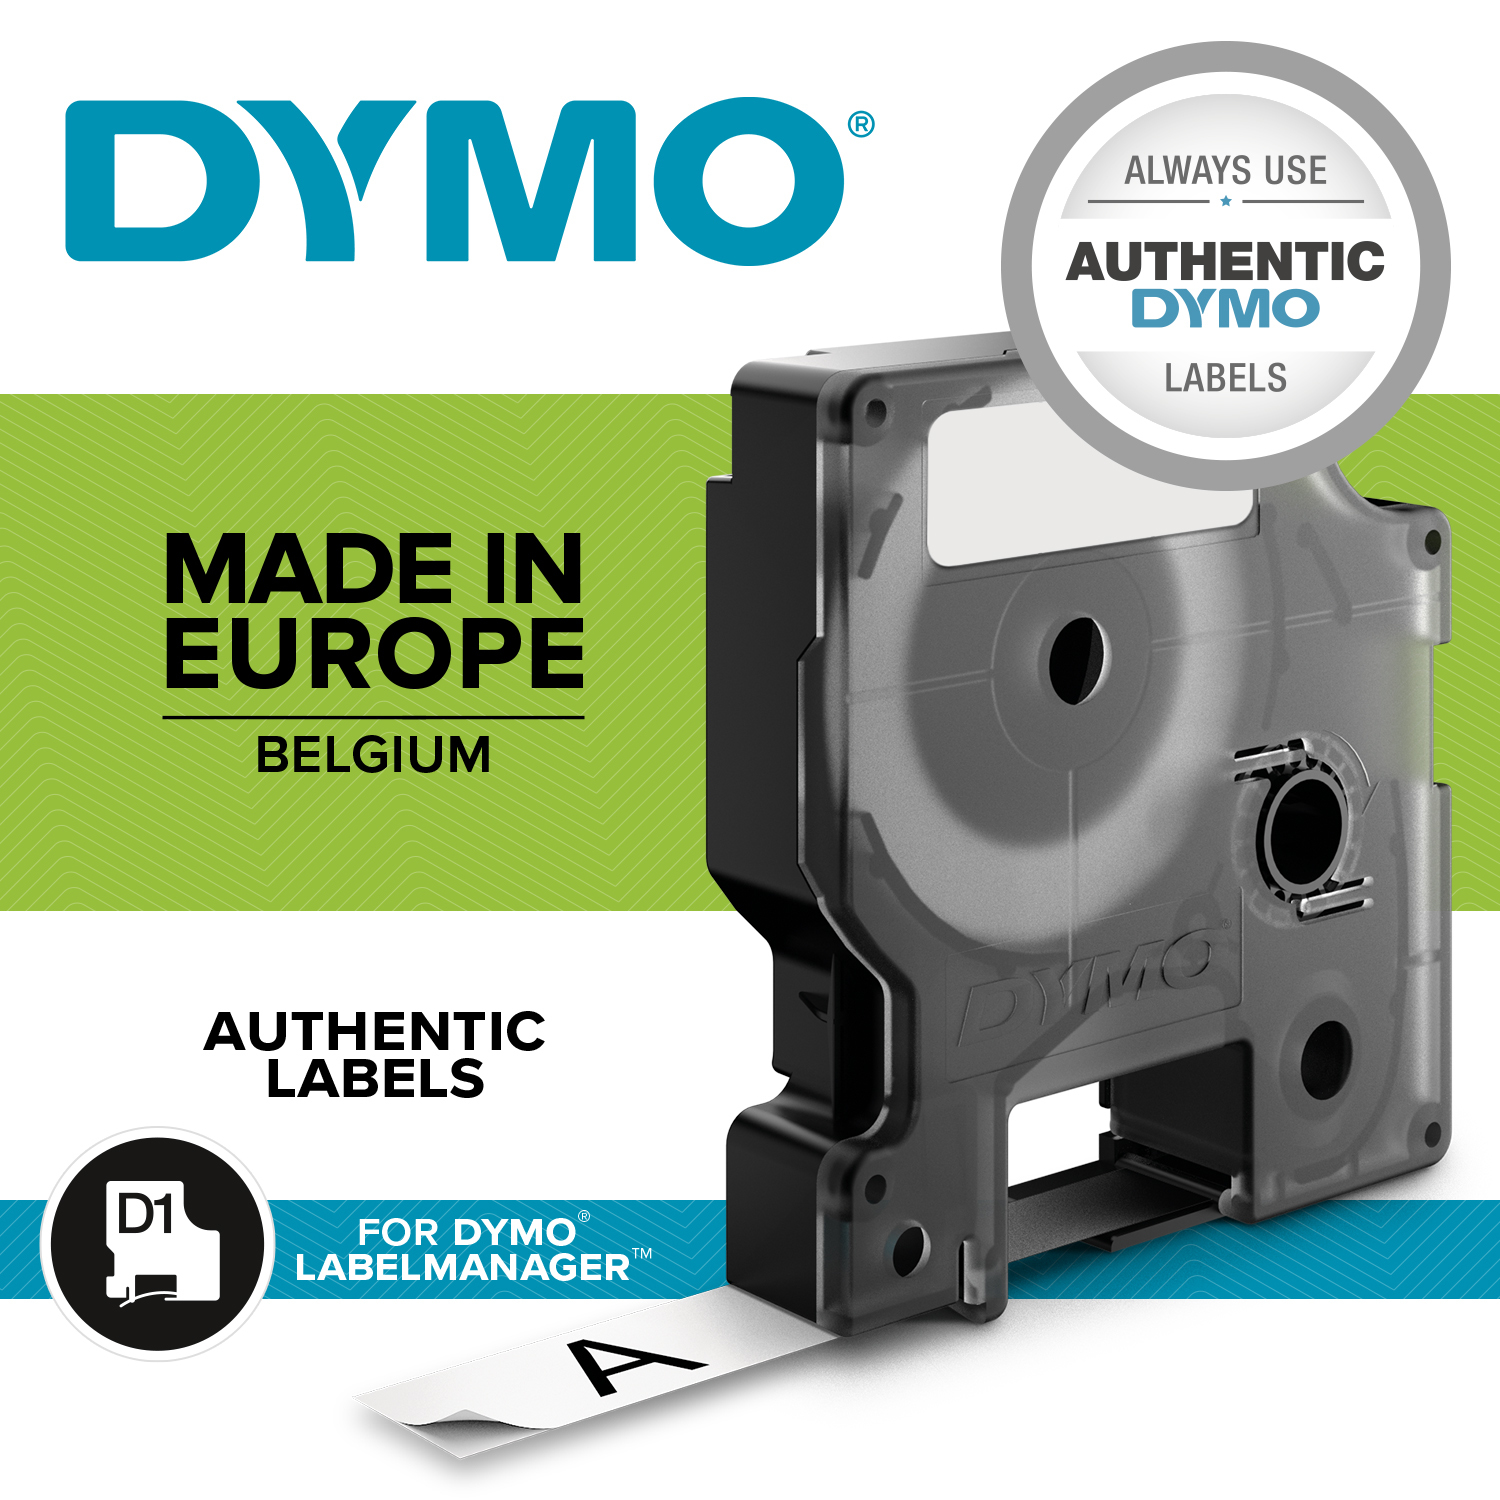 Dymo 43610/S0720770 DirectLabel-etikettes black on Transparent 6mm x 7m for Dymo D1 6-12mm/19mm/24mm/400 Duo